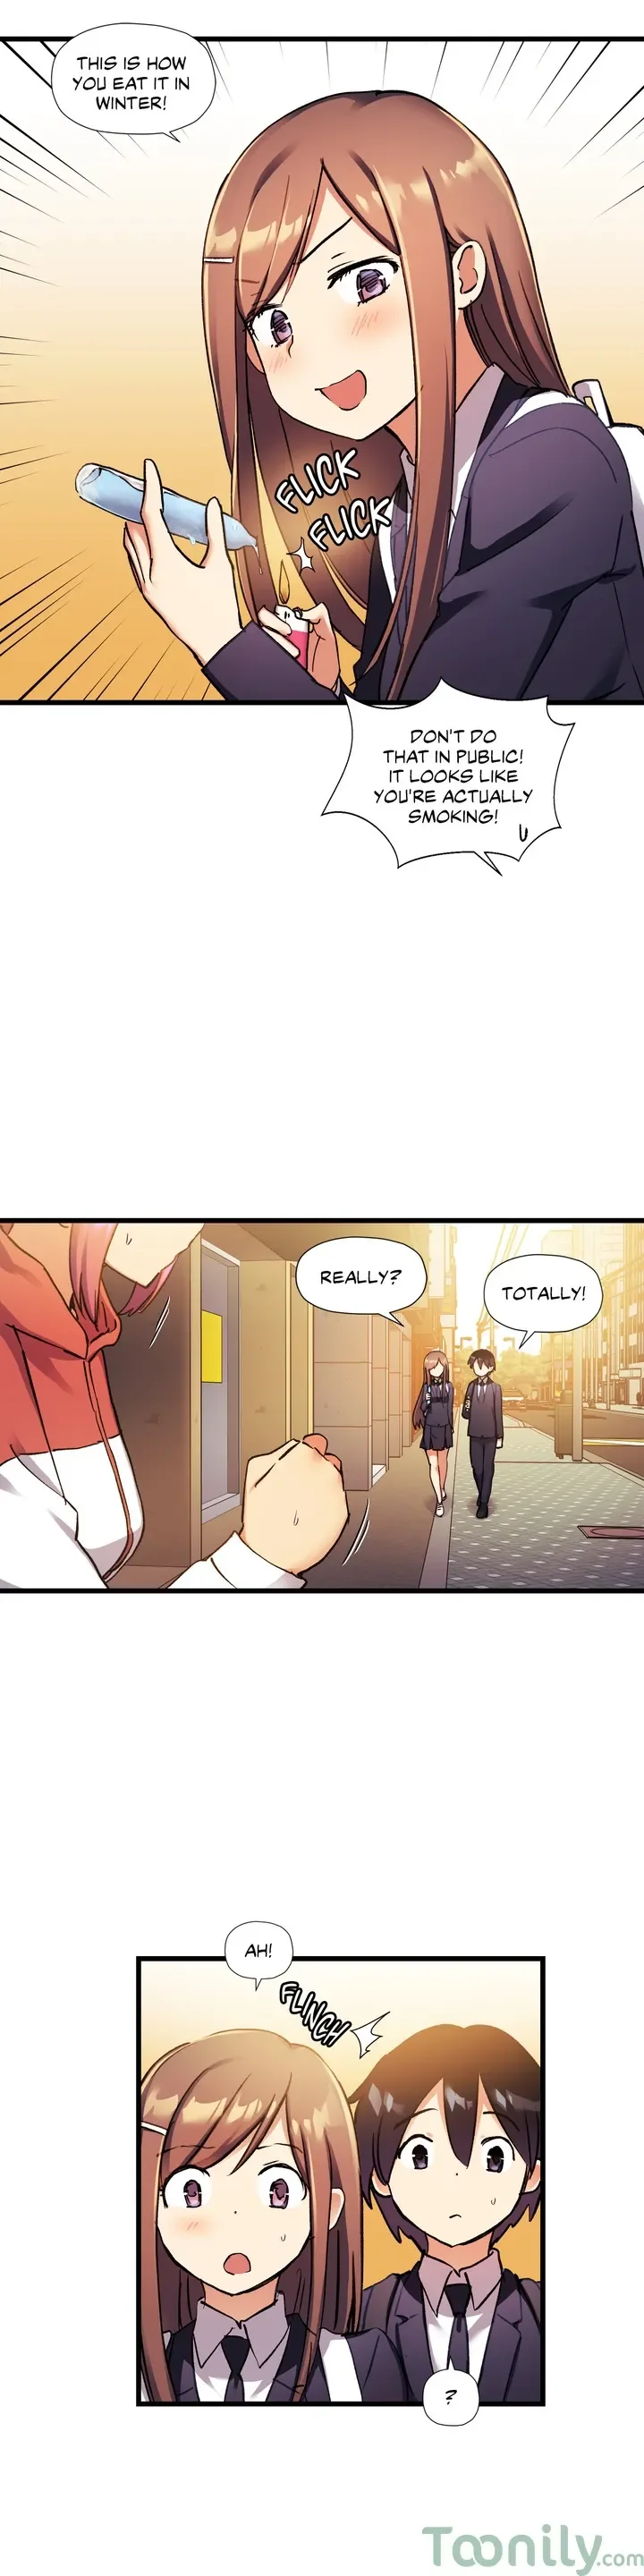 under-observation-my-first-loves-and-i-chap-31-6